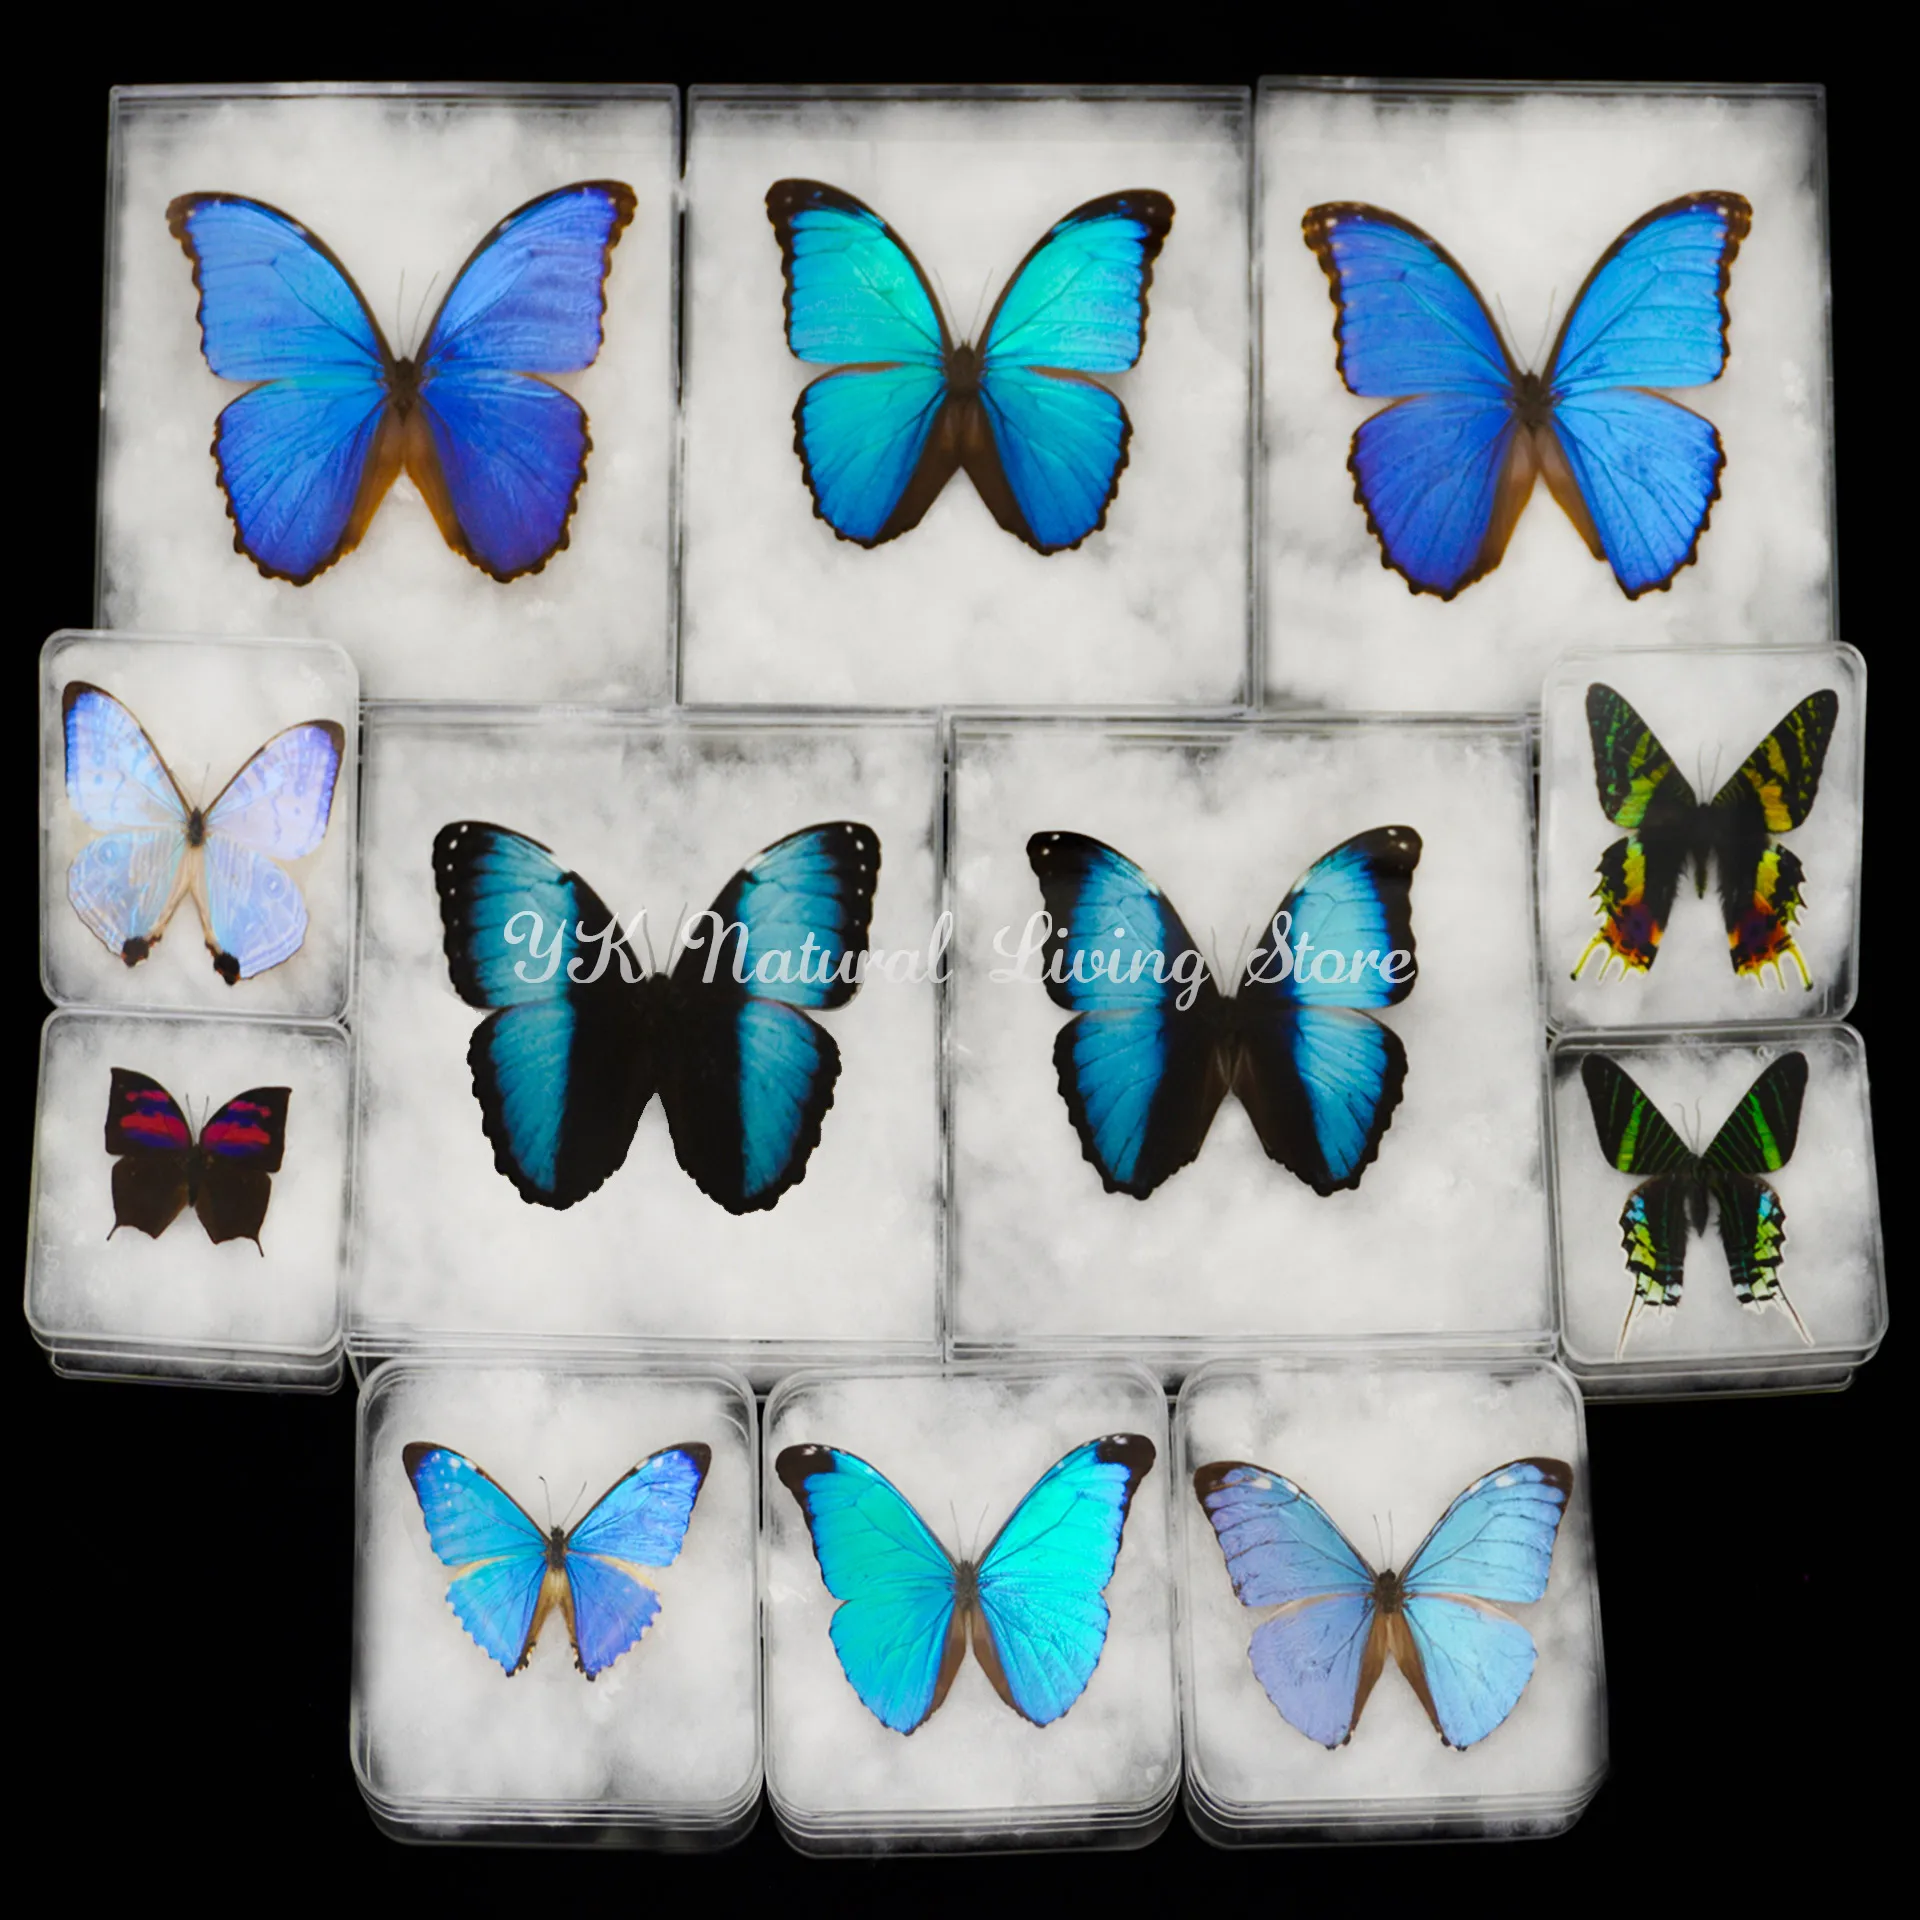 

Large Butterflies Rare Butterfly Specimens Stunning Real ButterFlies Can Be Removed For Decorative Display Collection Gifts